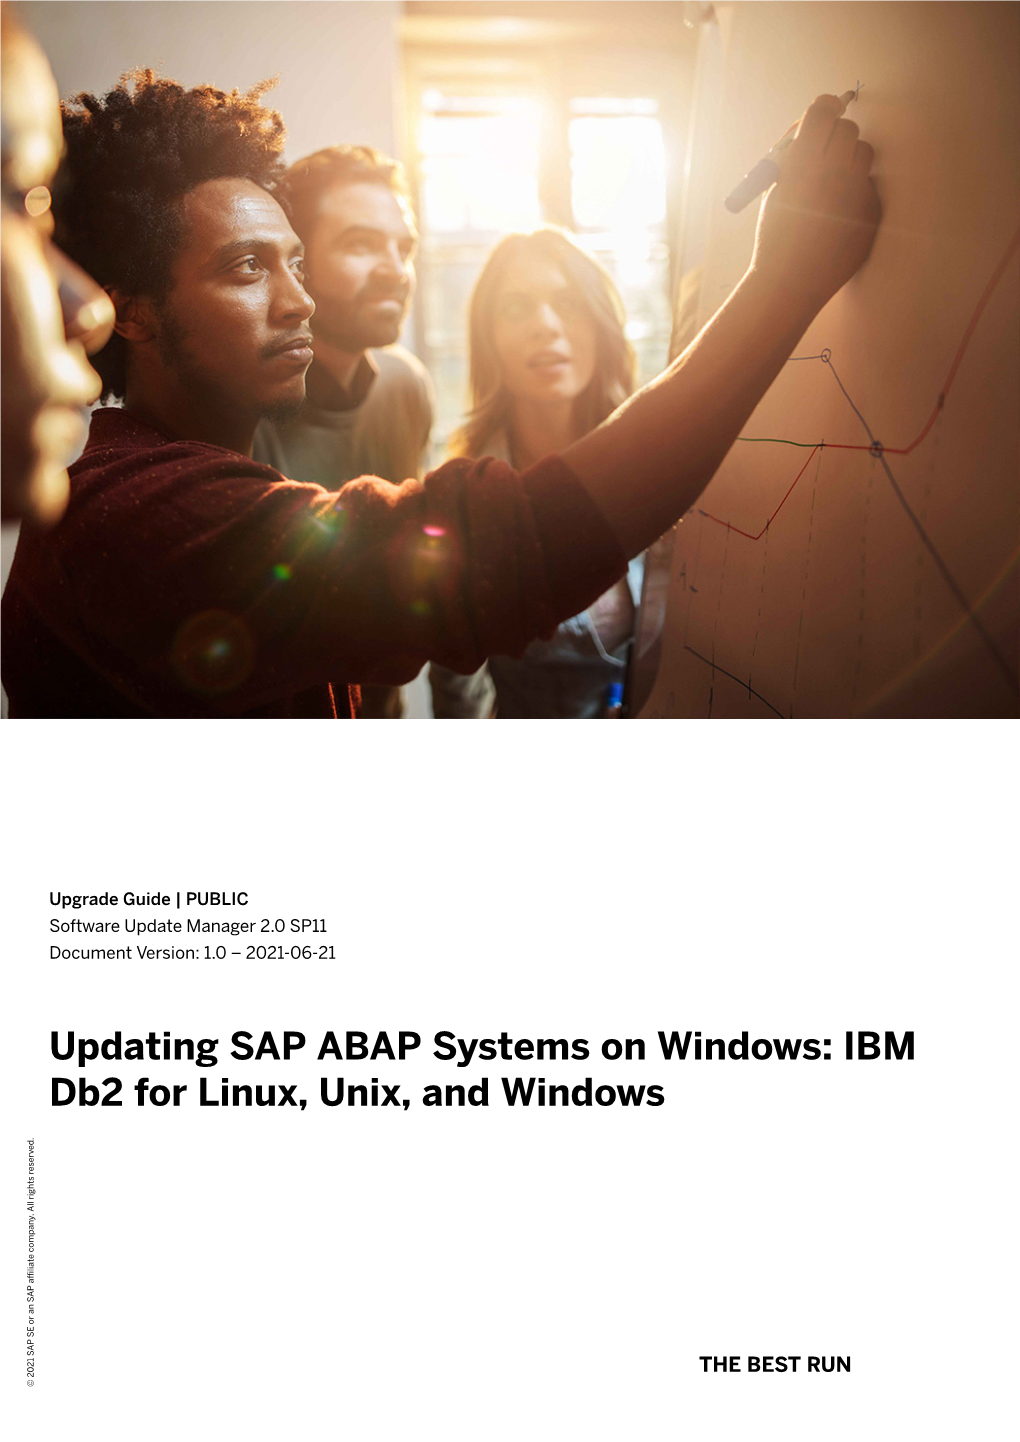 Updating SAP ABAP Systems on Windows: IBM Db2 for Linux, Unix, and Windows Company